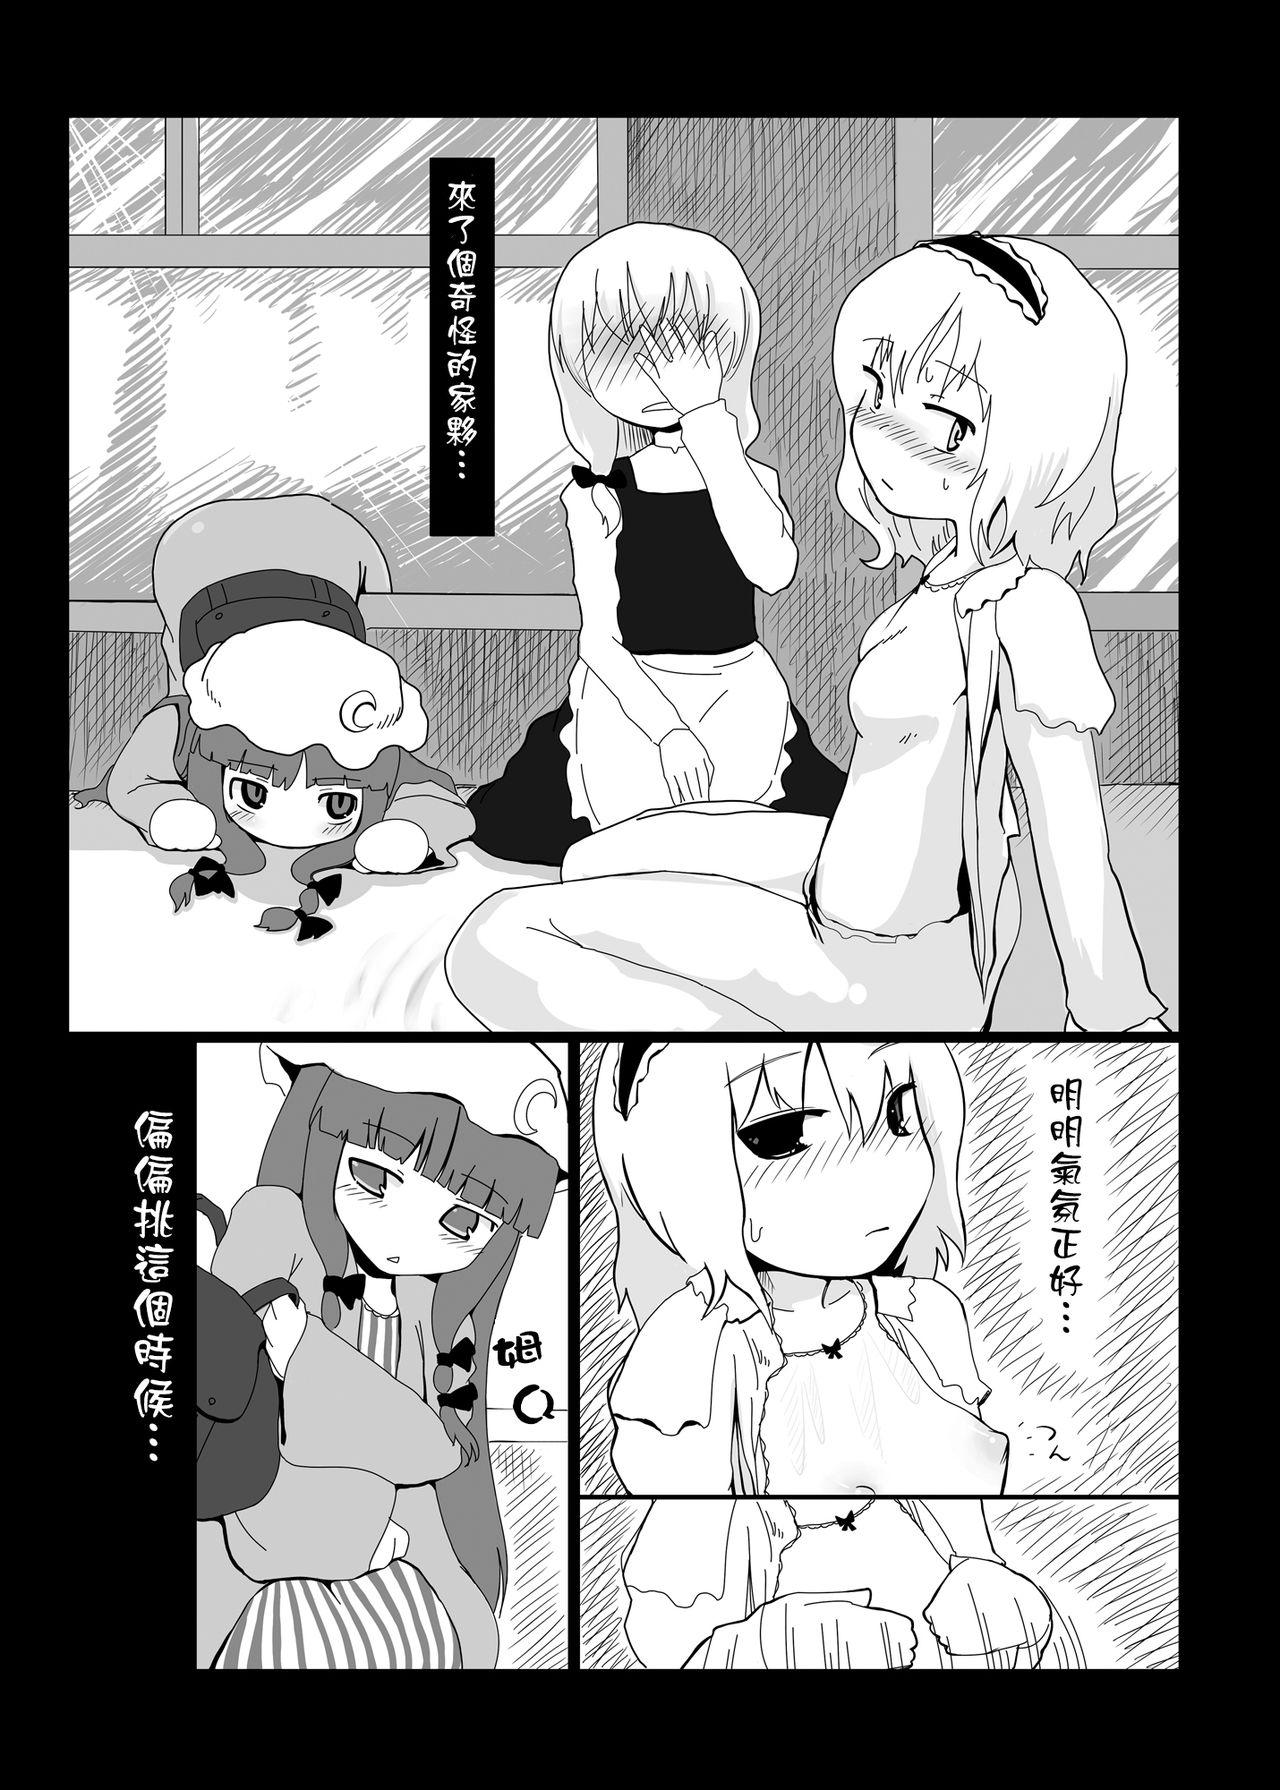 Butthole Touhou Ero Atsume. - Touhou project Shaved - Page 9